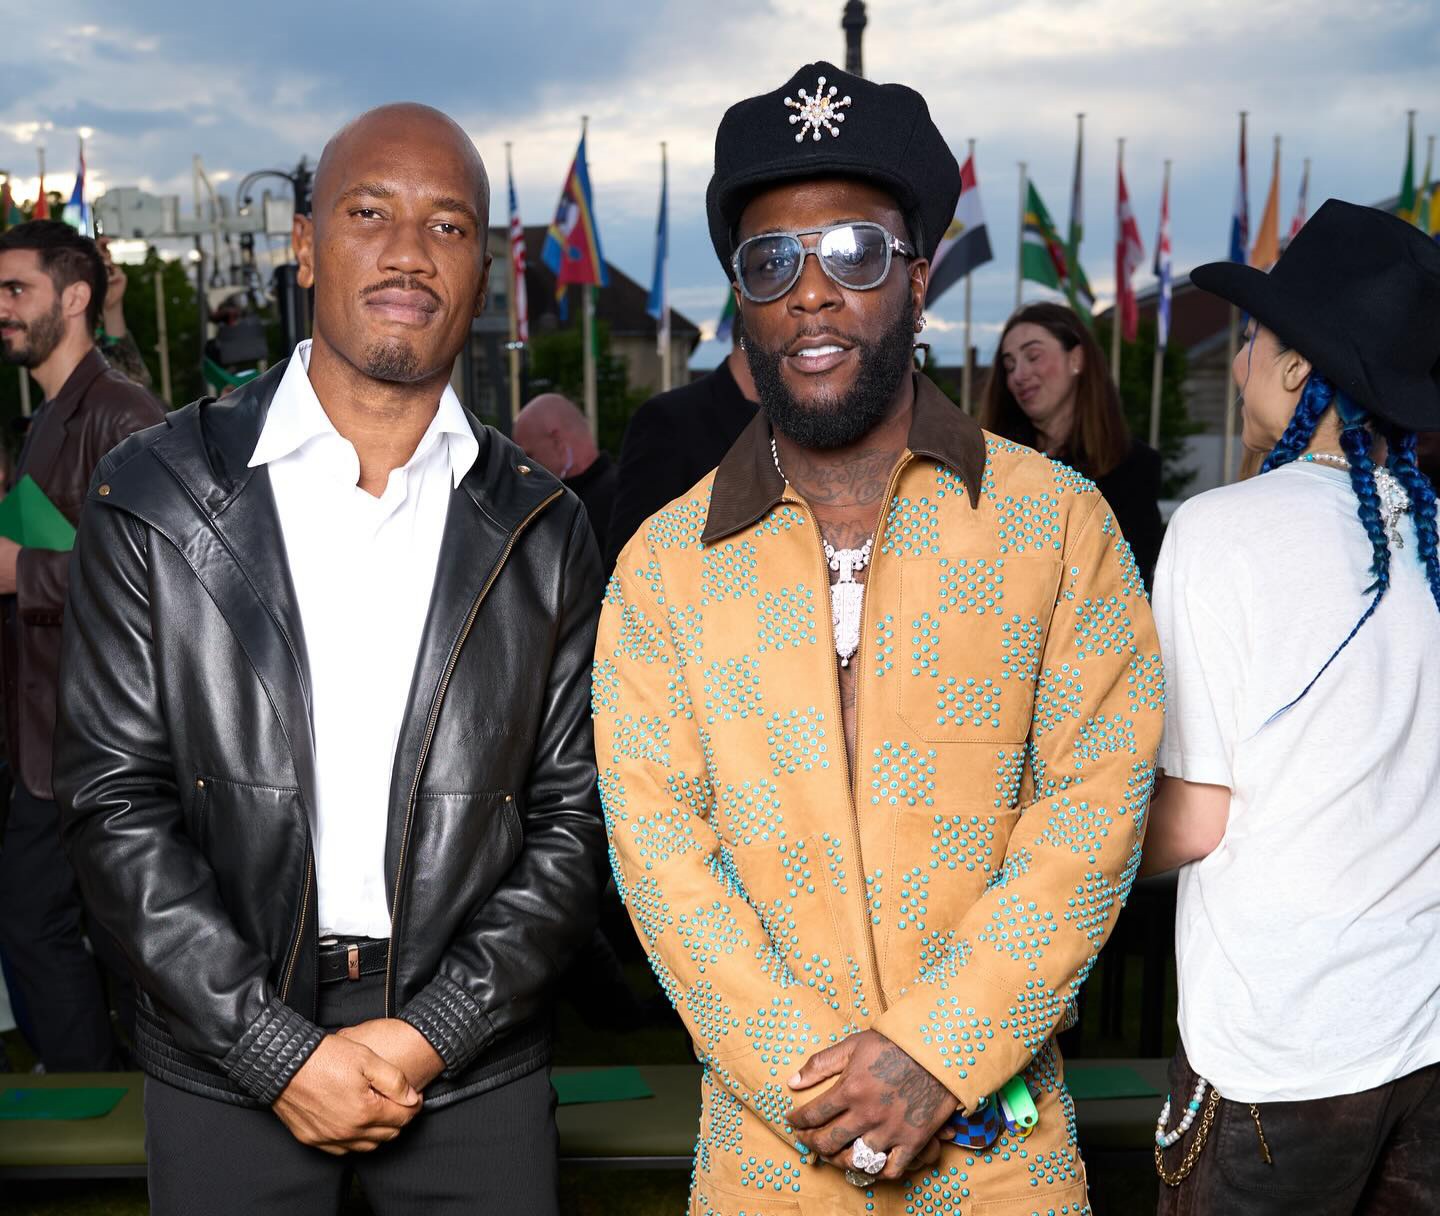 Star boys link-up- Chelsea Legend Didier Drogba poses shot with Afrobeats stars Wizkid and Burna Boy